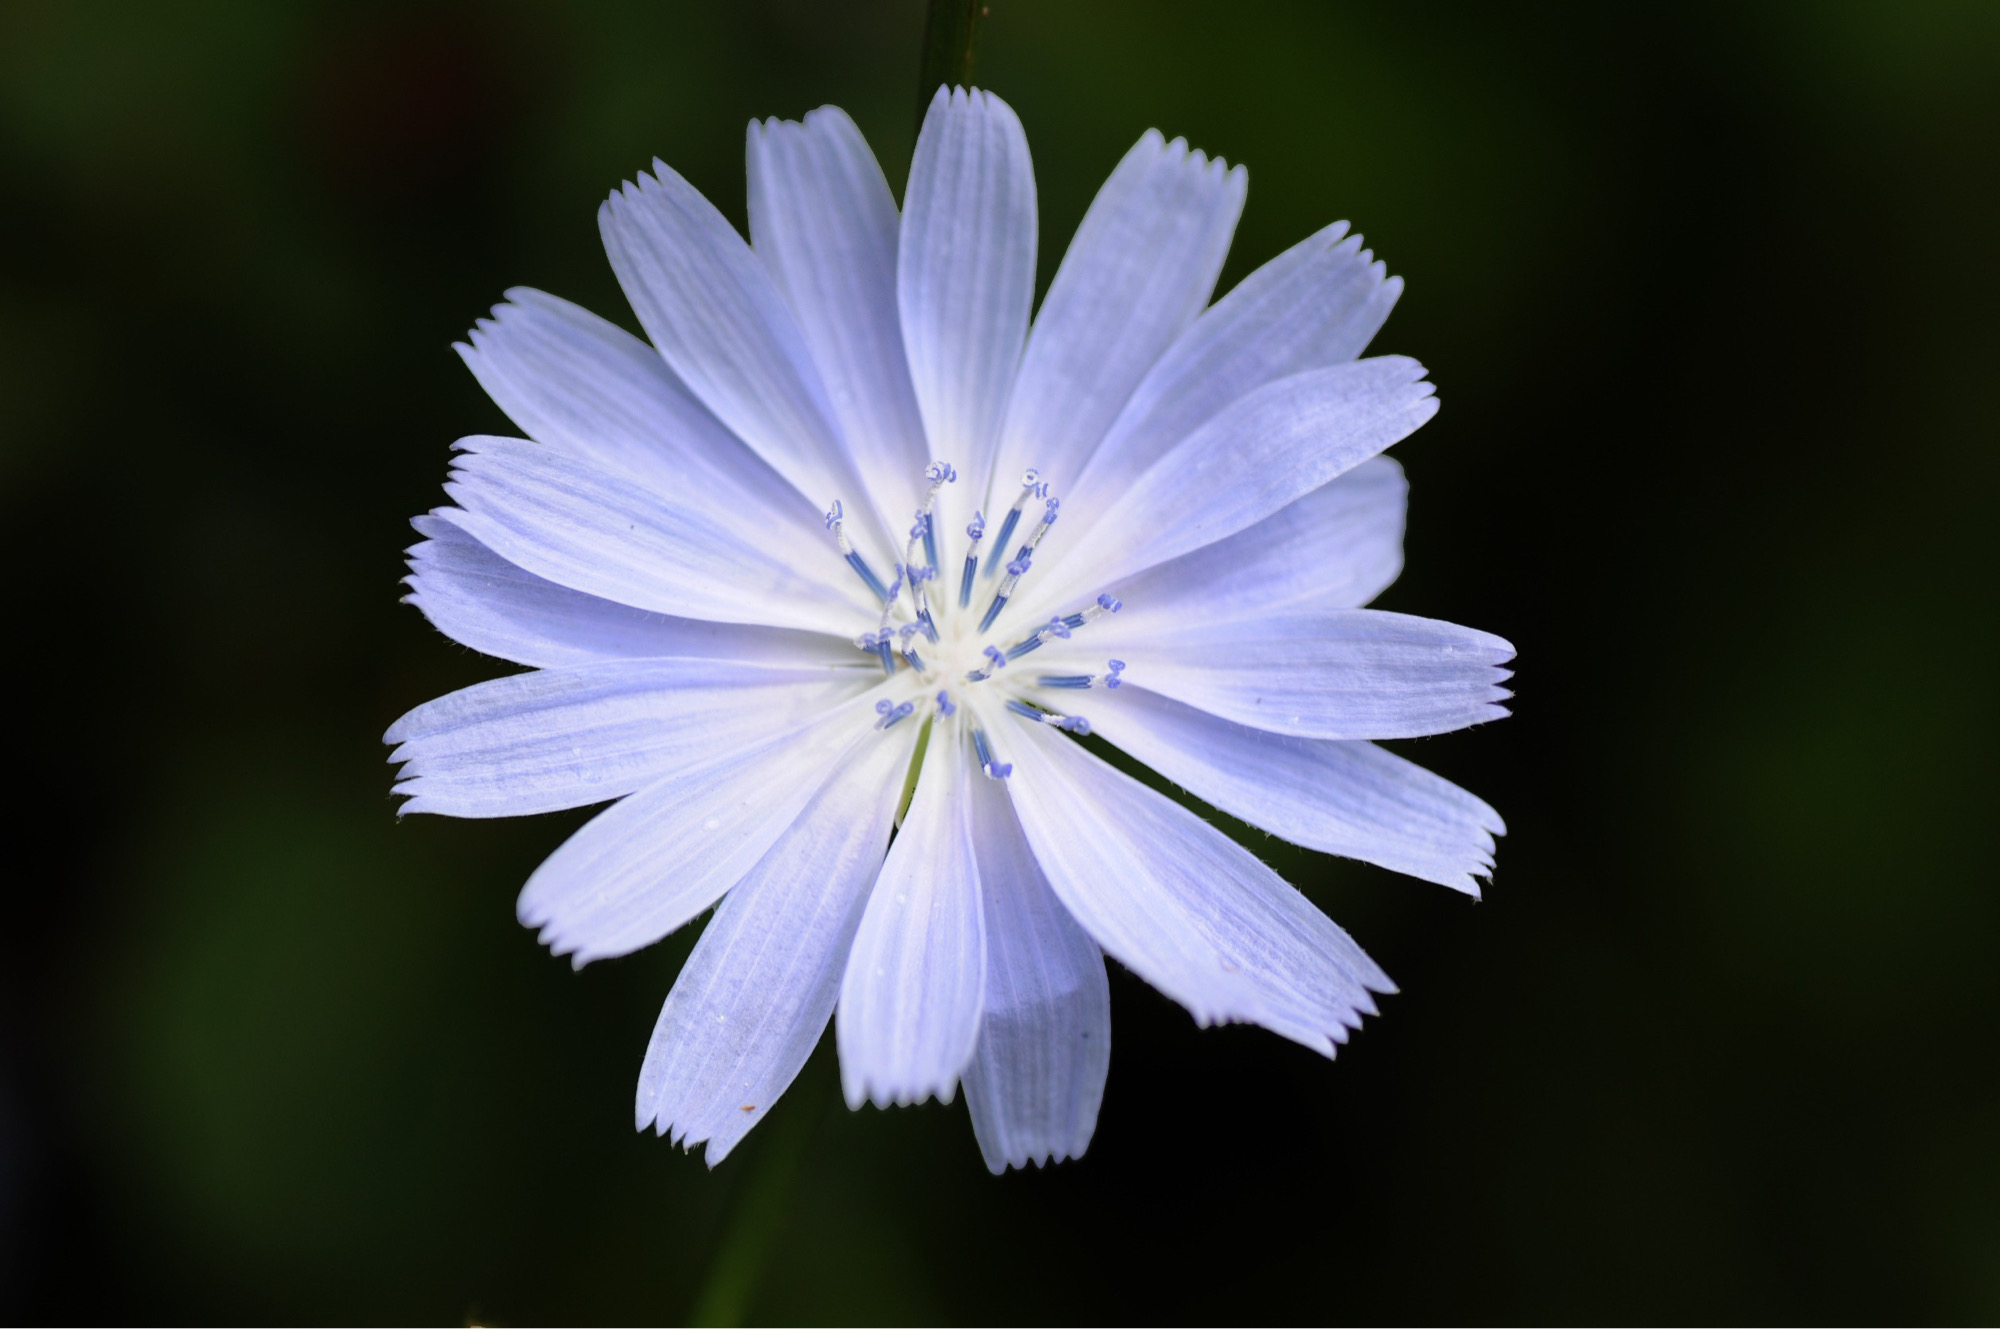 A close-up of a single blue chicory flower